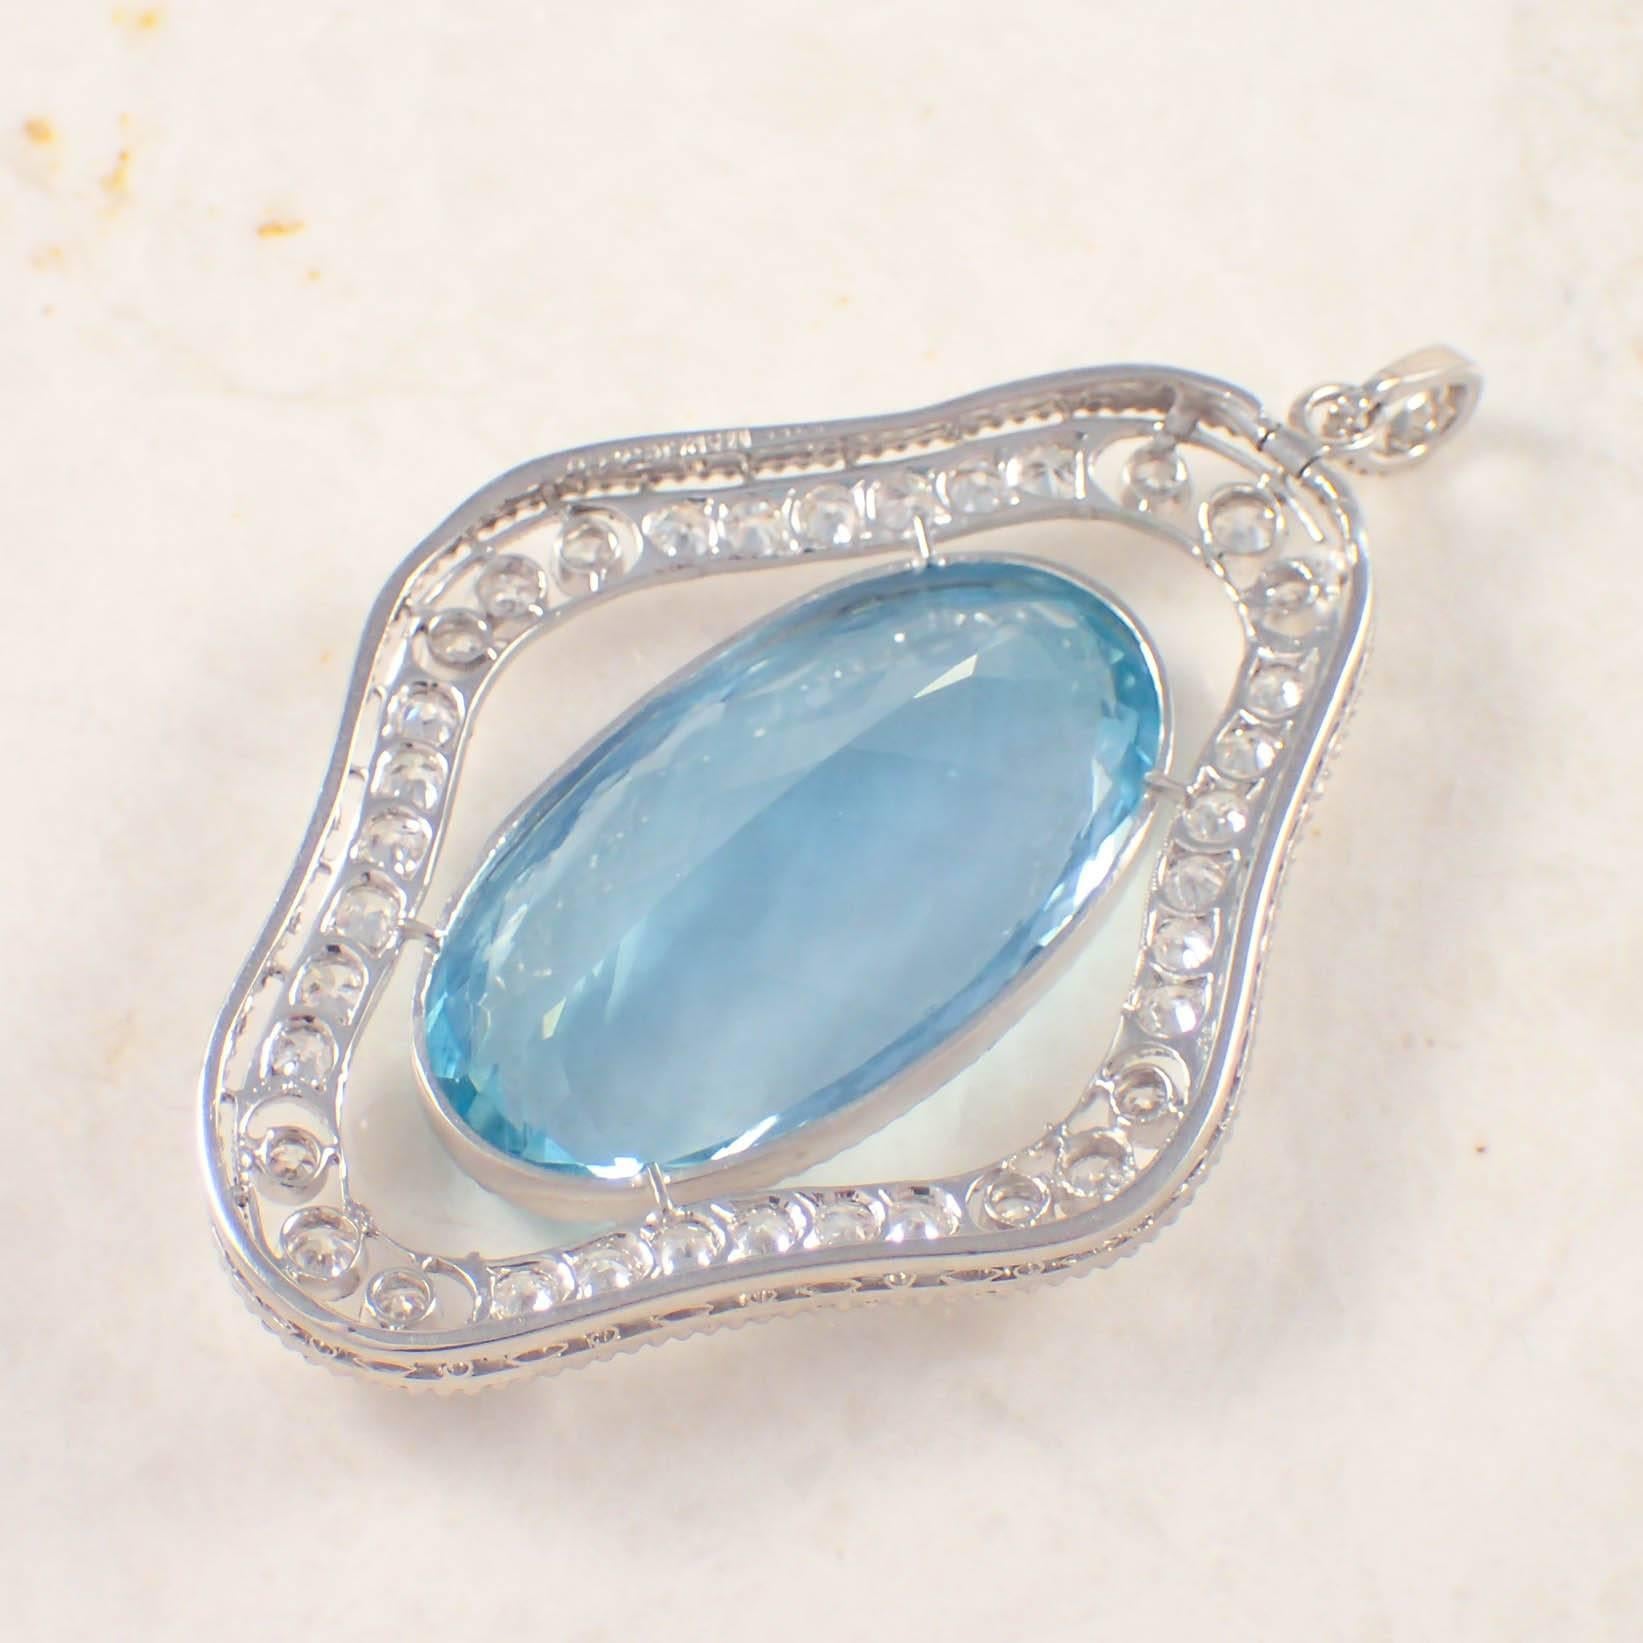 Platinum Art Deco aquamarine and diamond Marcus & Co. pendant. The shield shaped, open work pendant is set with one oval aquamarine measuring 26 X 14 mm surrounded by 30 European cut diamonds weighing approximately 1.50 carats total. The pendant